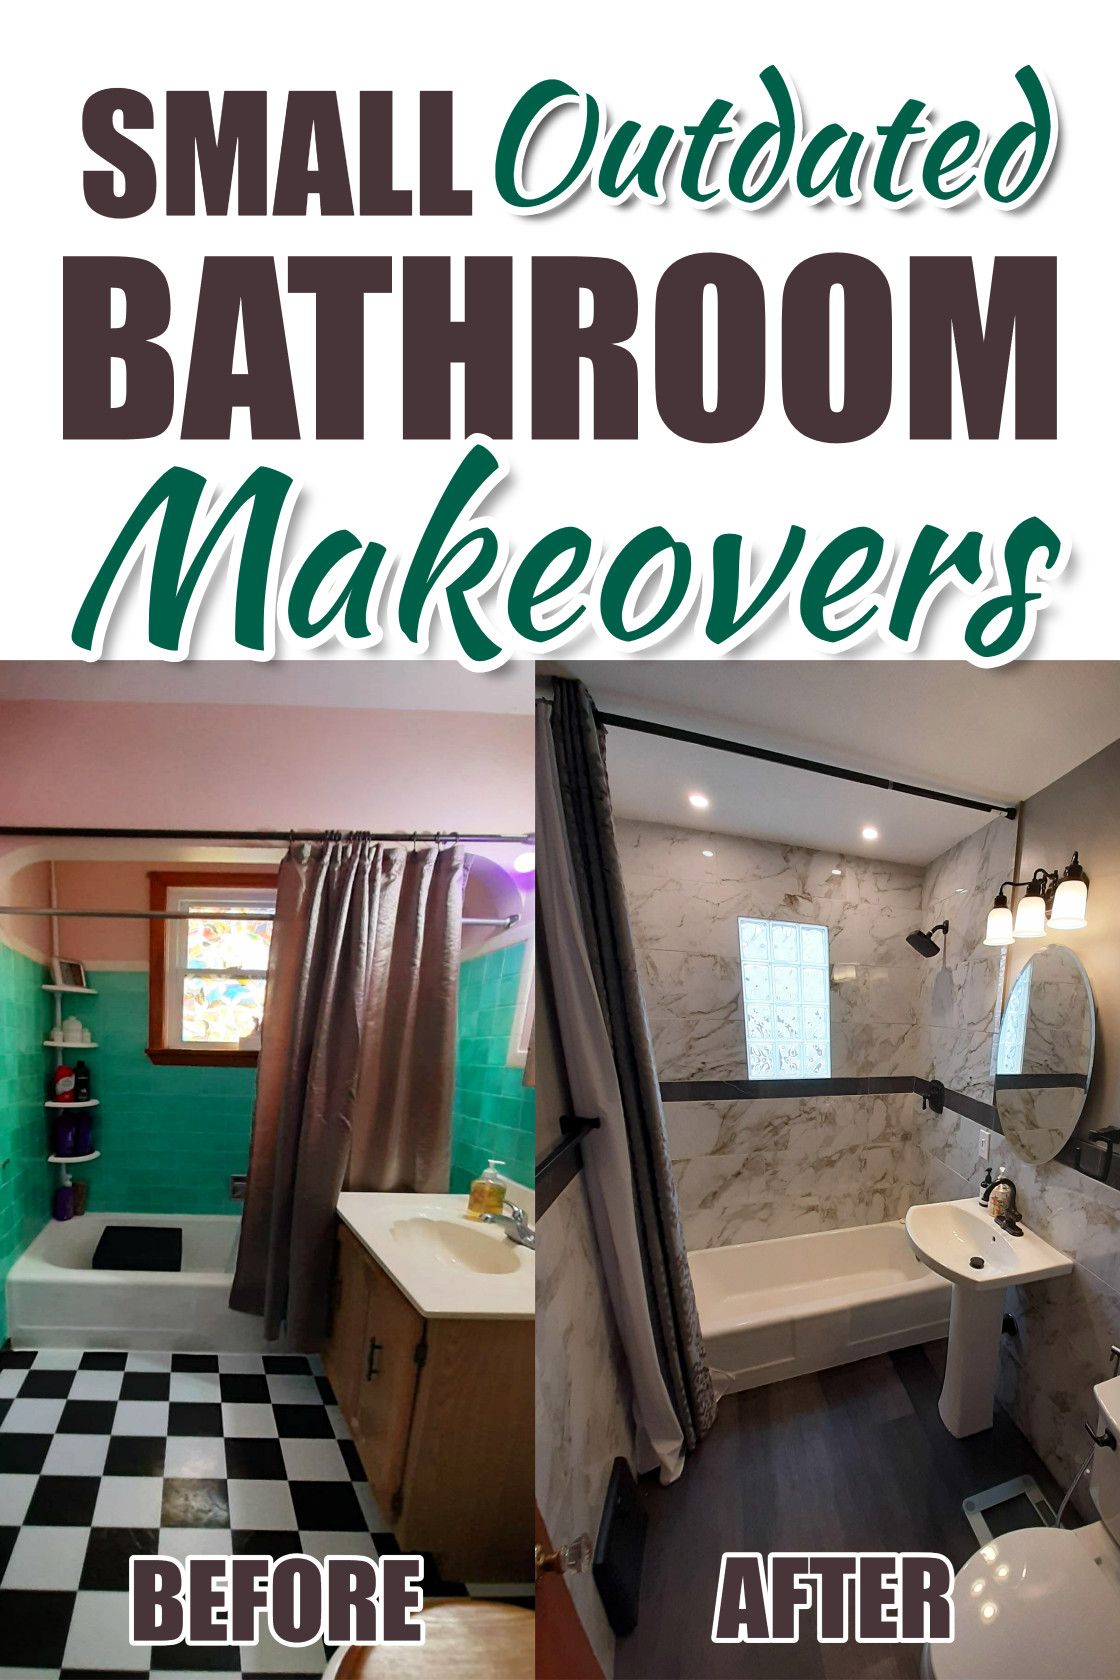 Small Outdated Bathroom Makeovers Before and After Budget-Friendly Upgrades